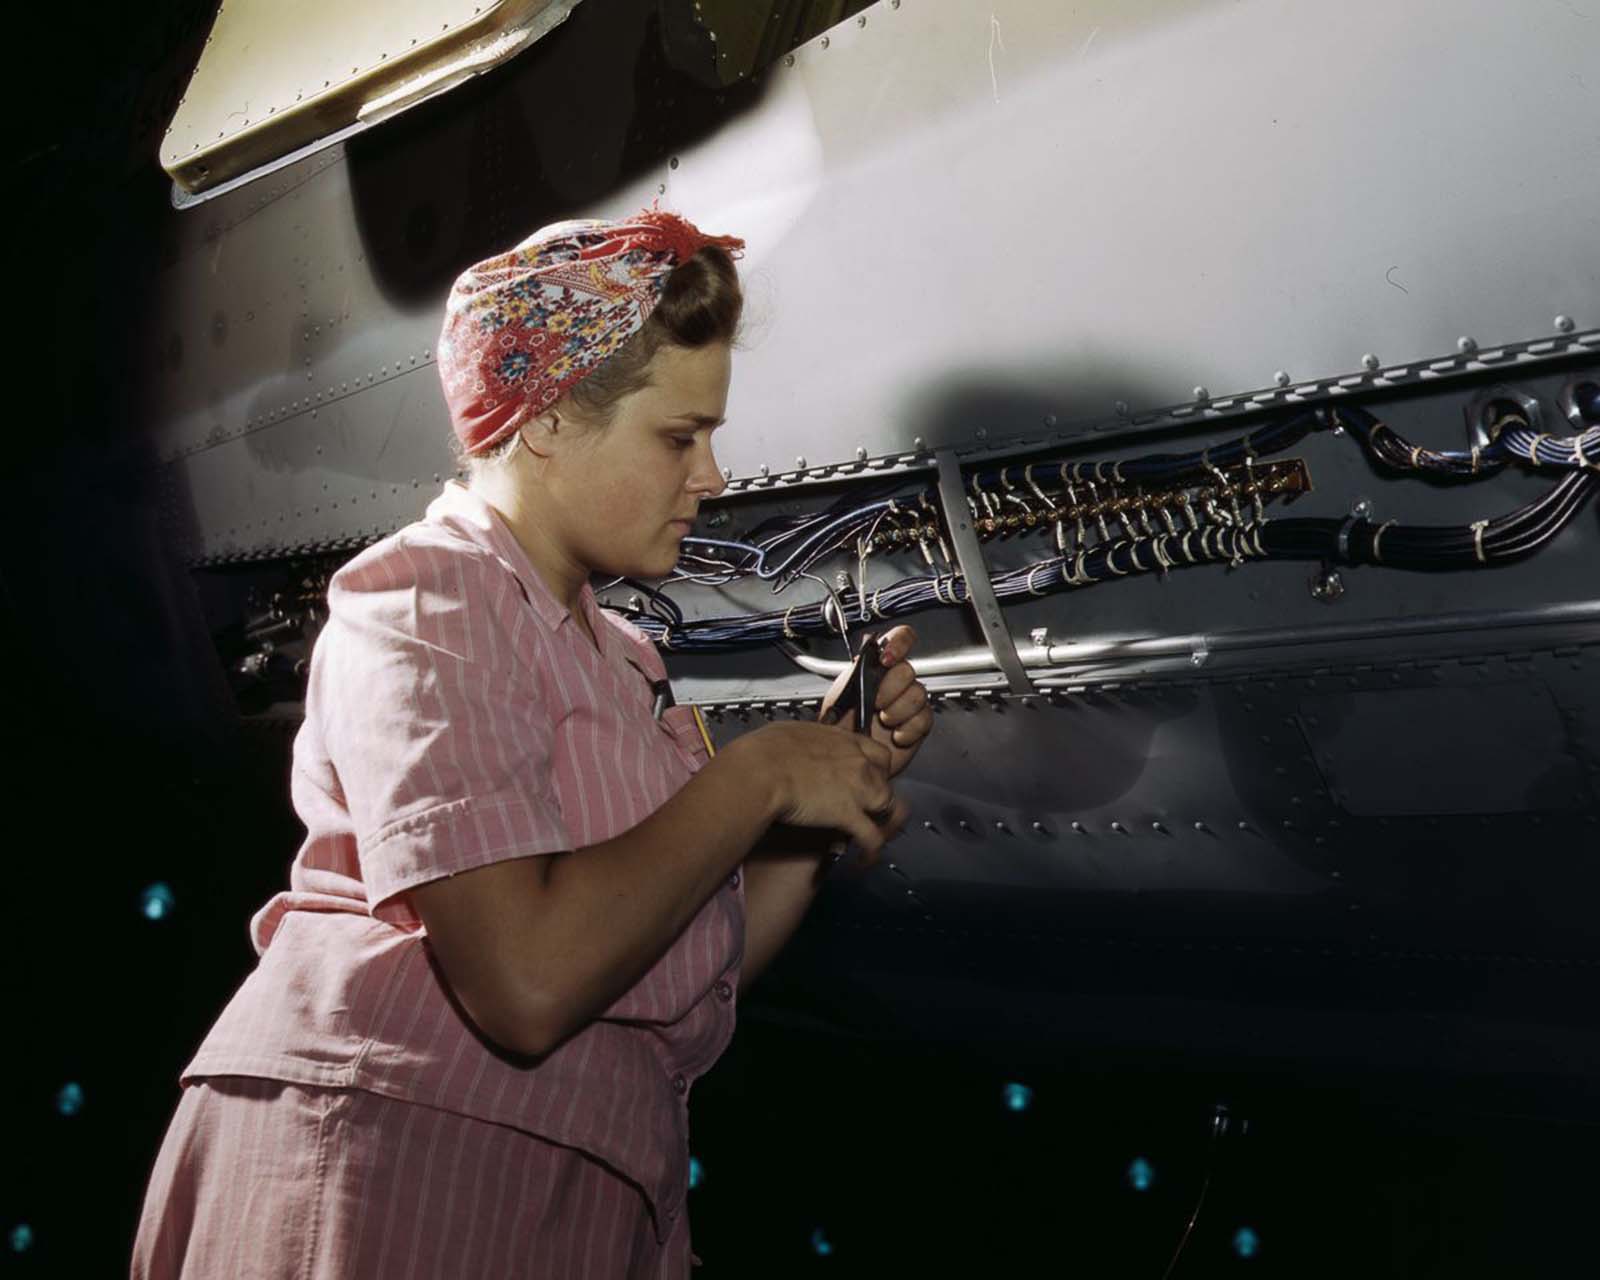 A Douglas Aircraft Company employee does delicate electrical work on a plane at the plant in Long Beach, California, 1942.